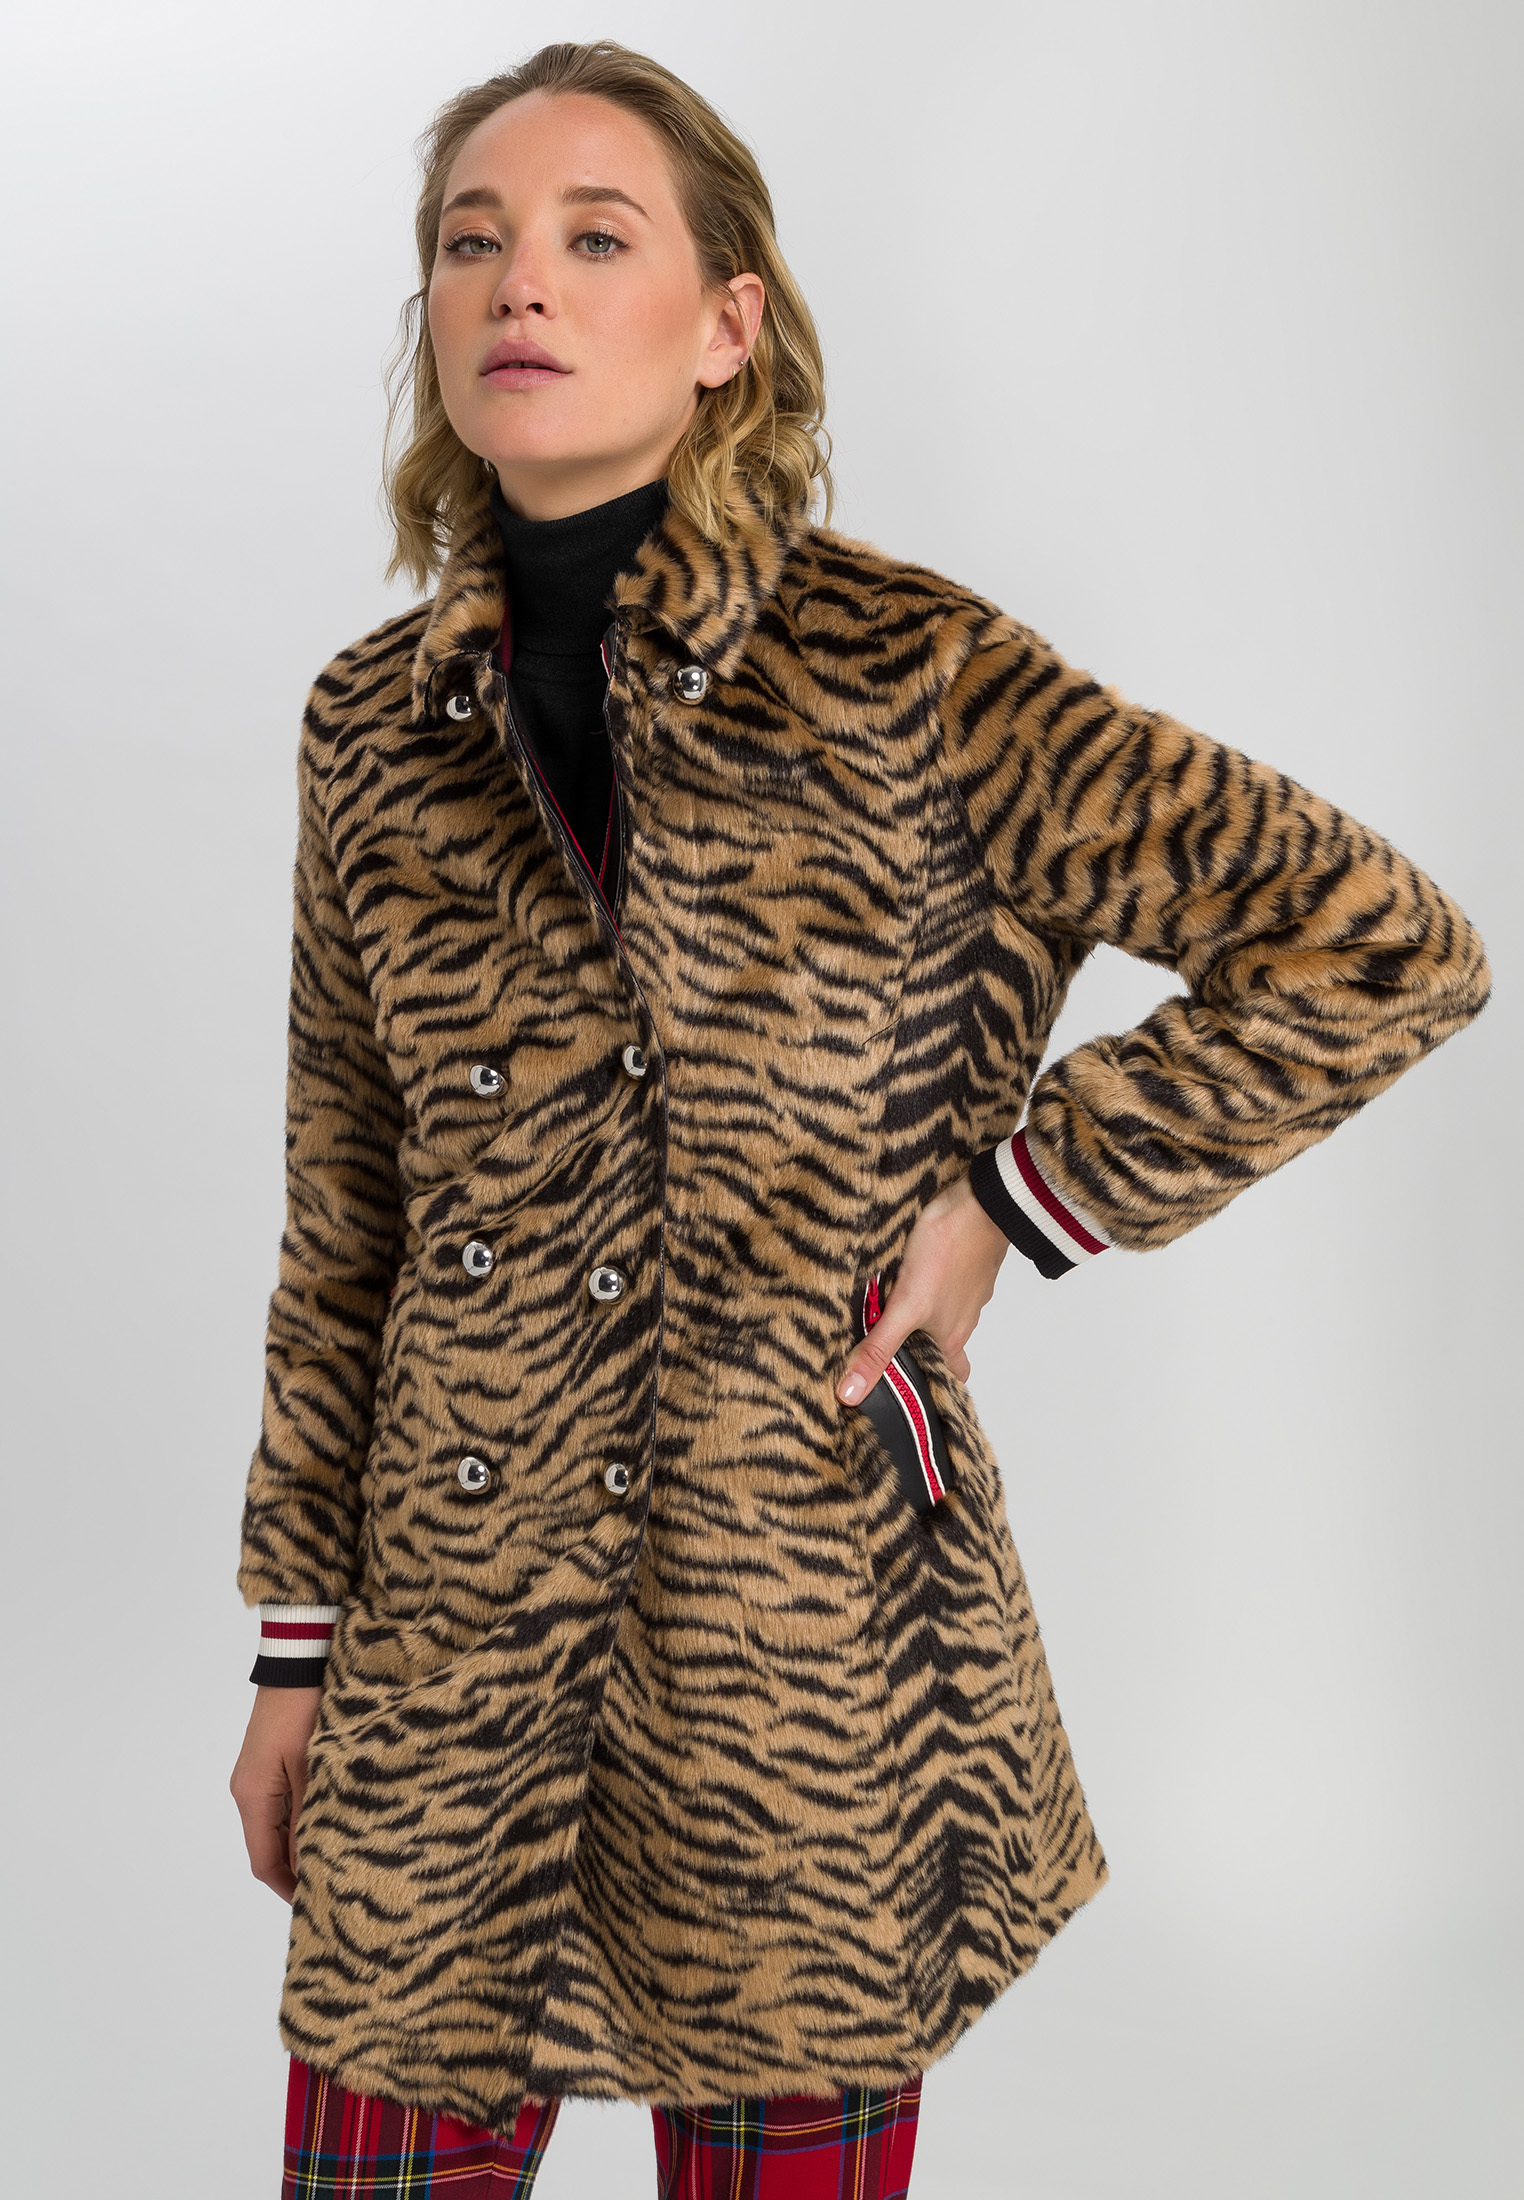 Reversible coat in tiger pattern | Outdoor & Coats | Fashion